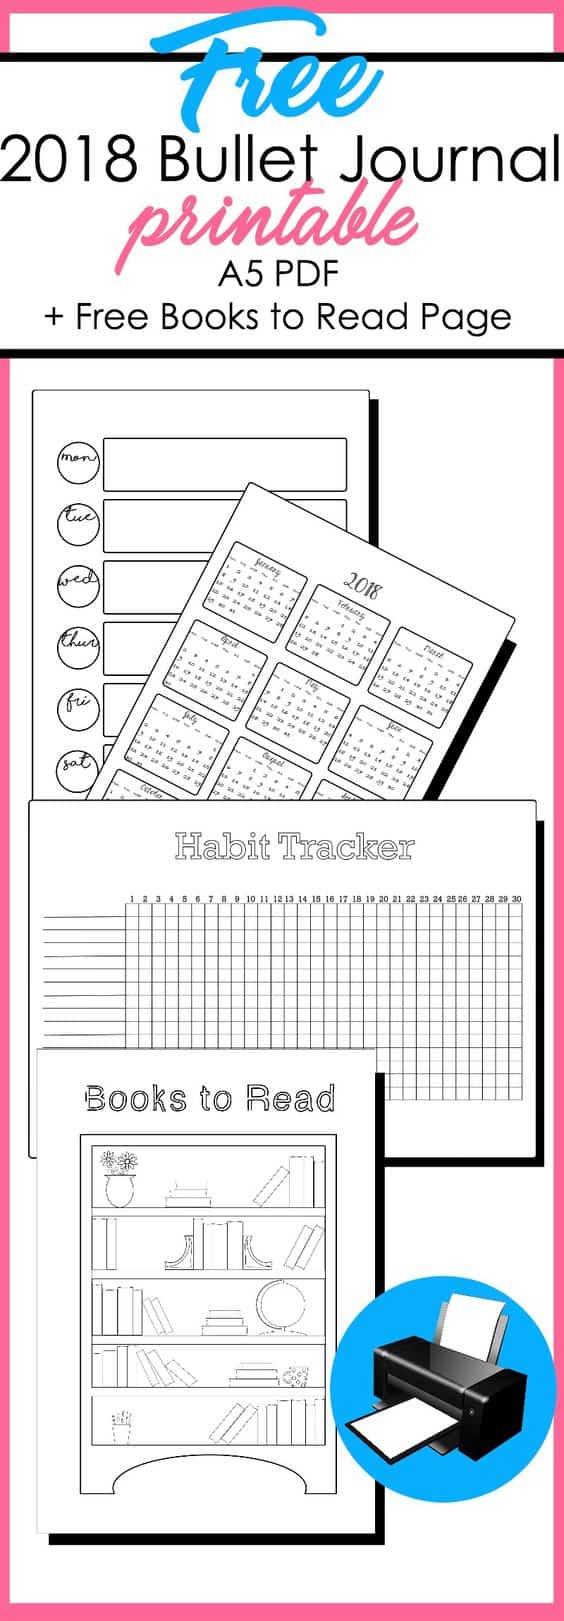 15 Creative Bullet Journal Printables for When You Don't Have Time to Be